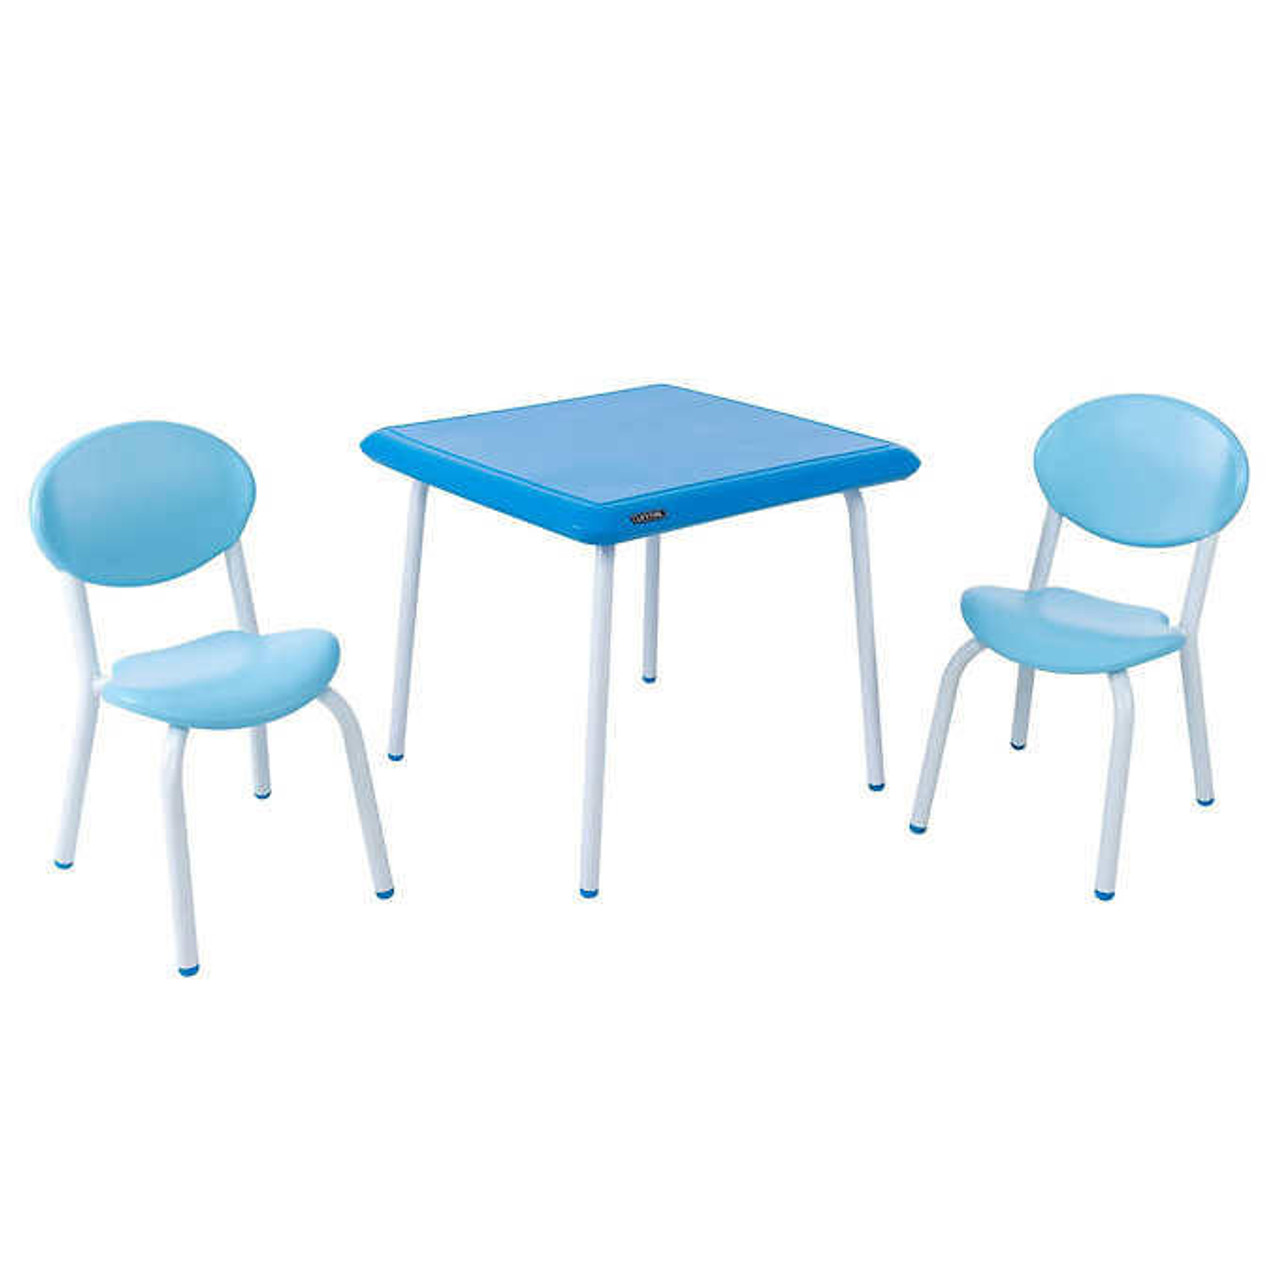 LIFETIME Lifetime Essential Children’s Square Table and 2 Chair Set - Stackable Chairs 